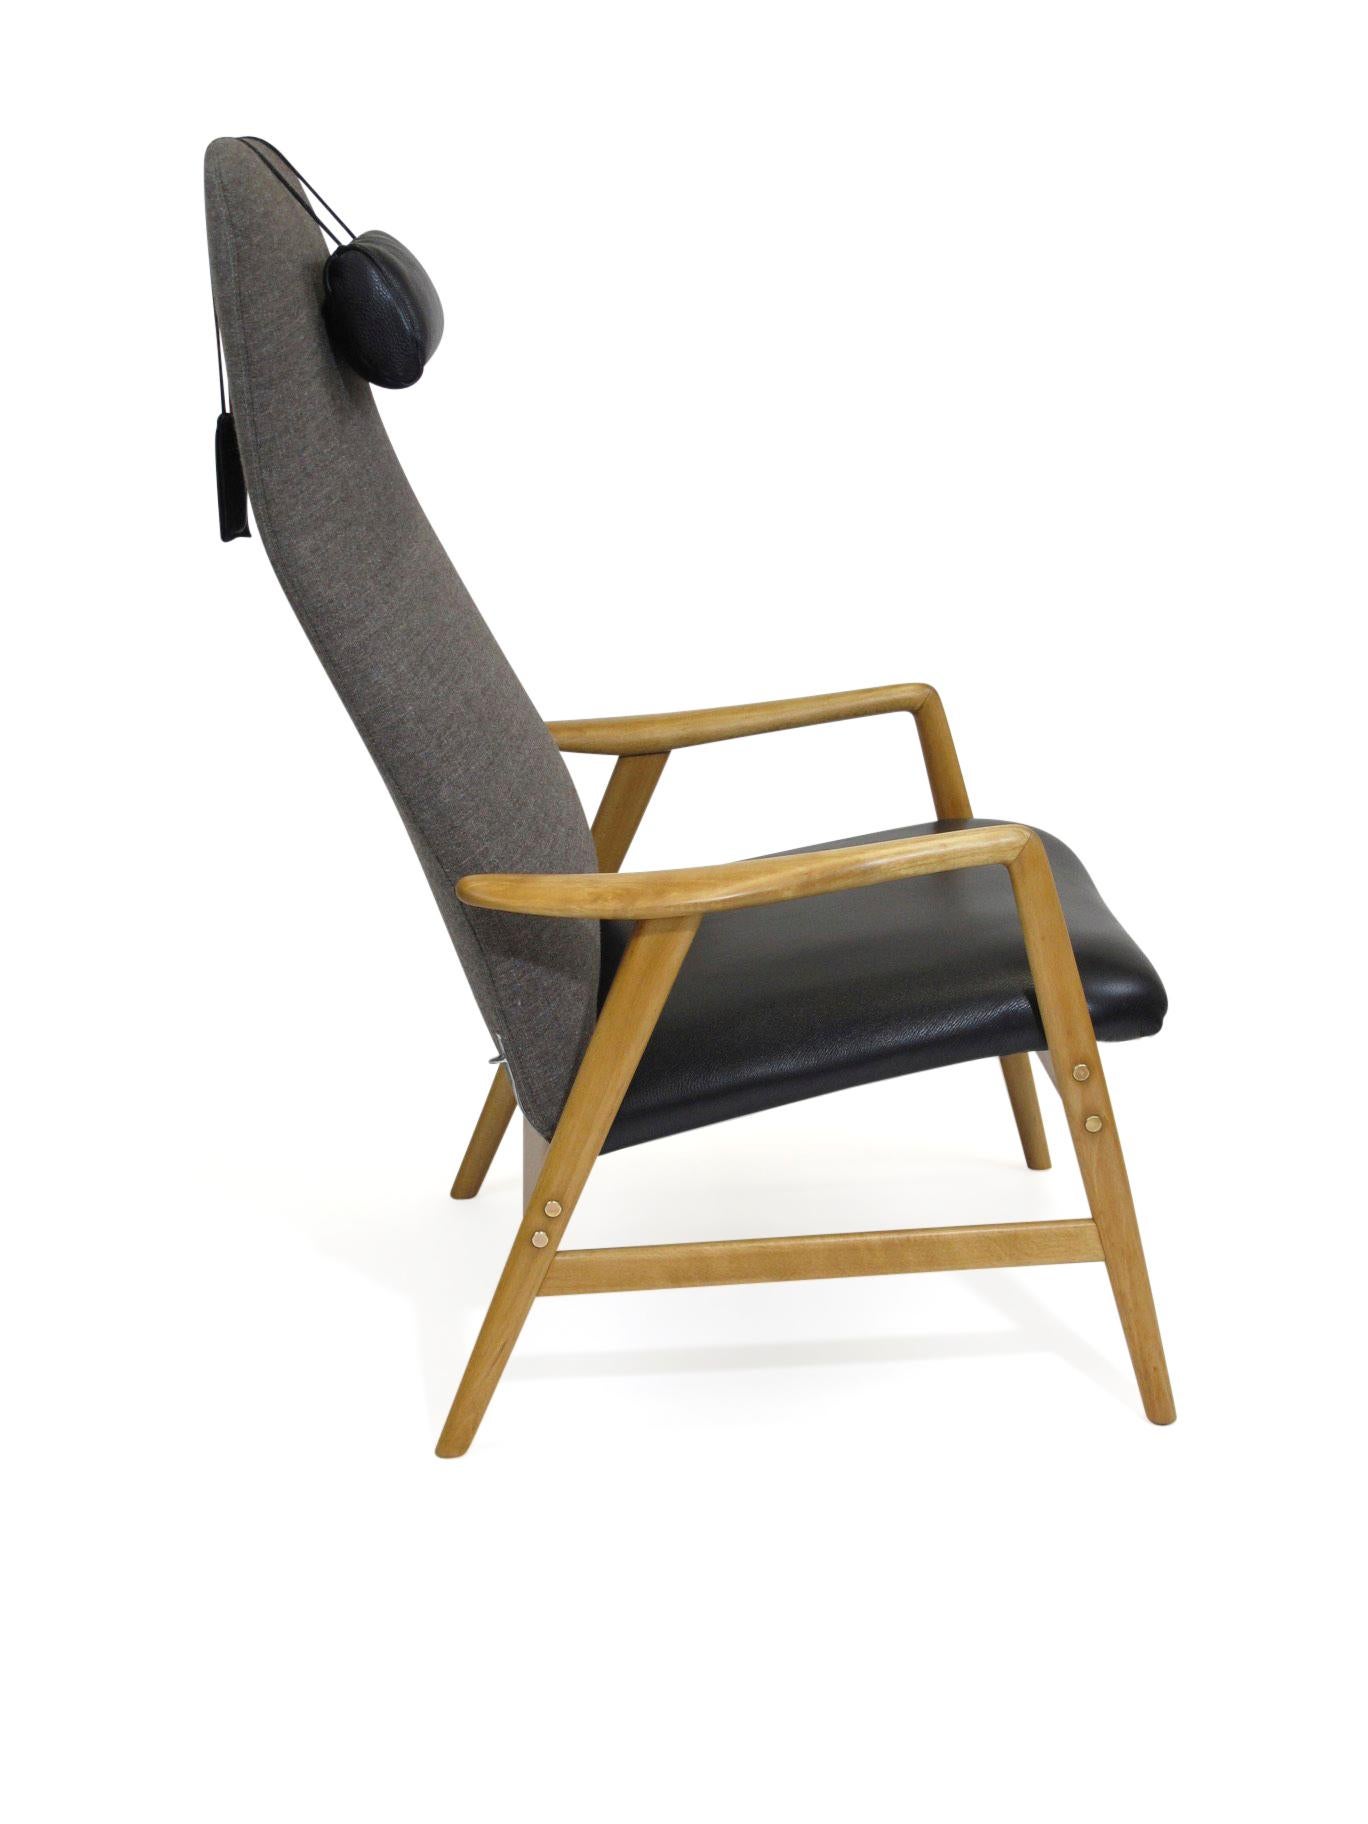 Danish Alf Svensson for Dux Beech Lounge Chair with Black Leather Seat